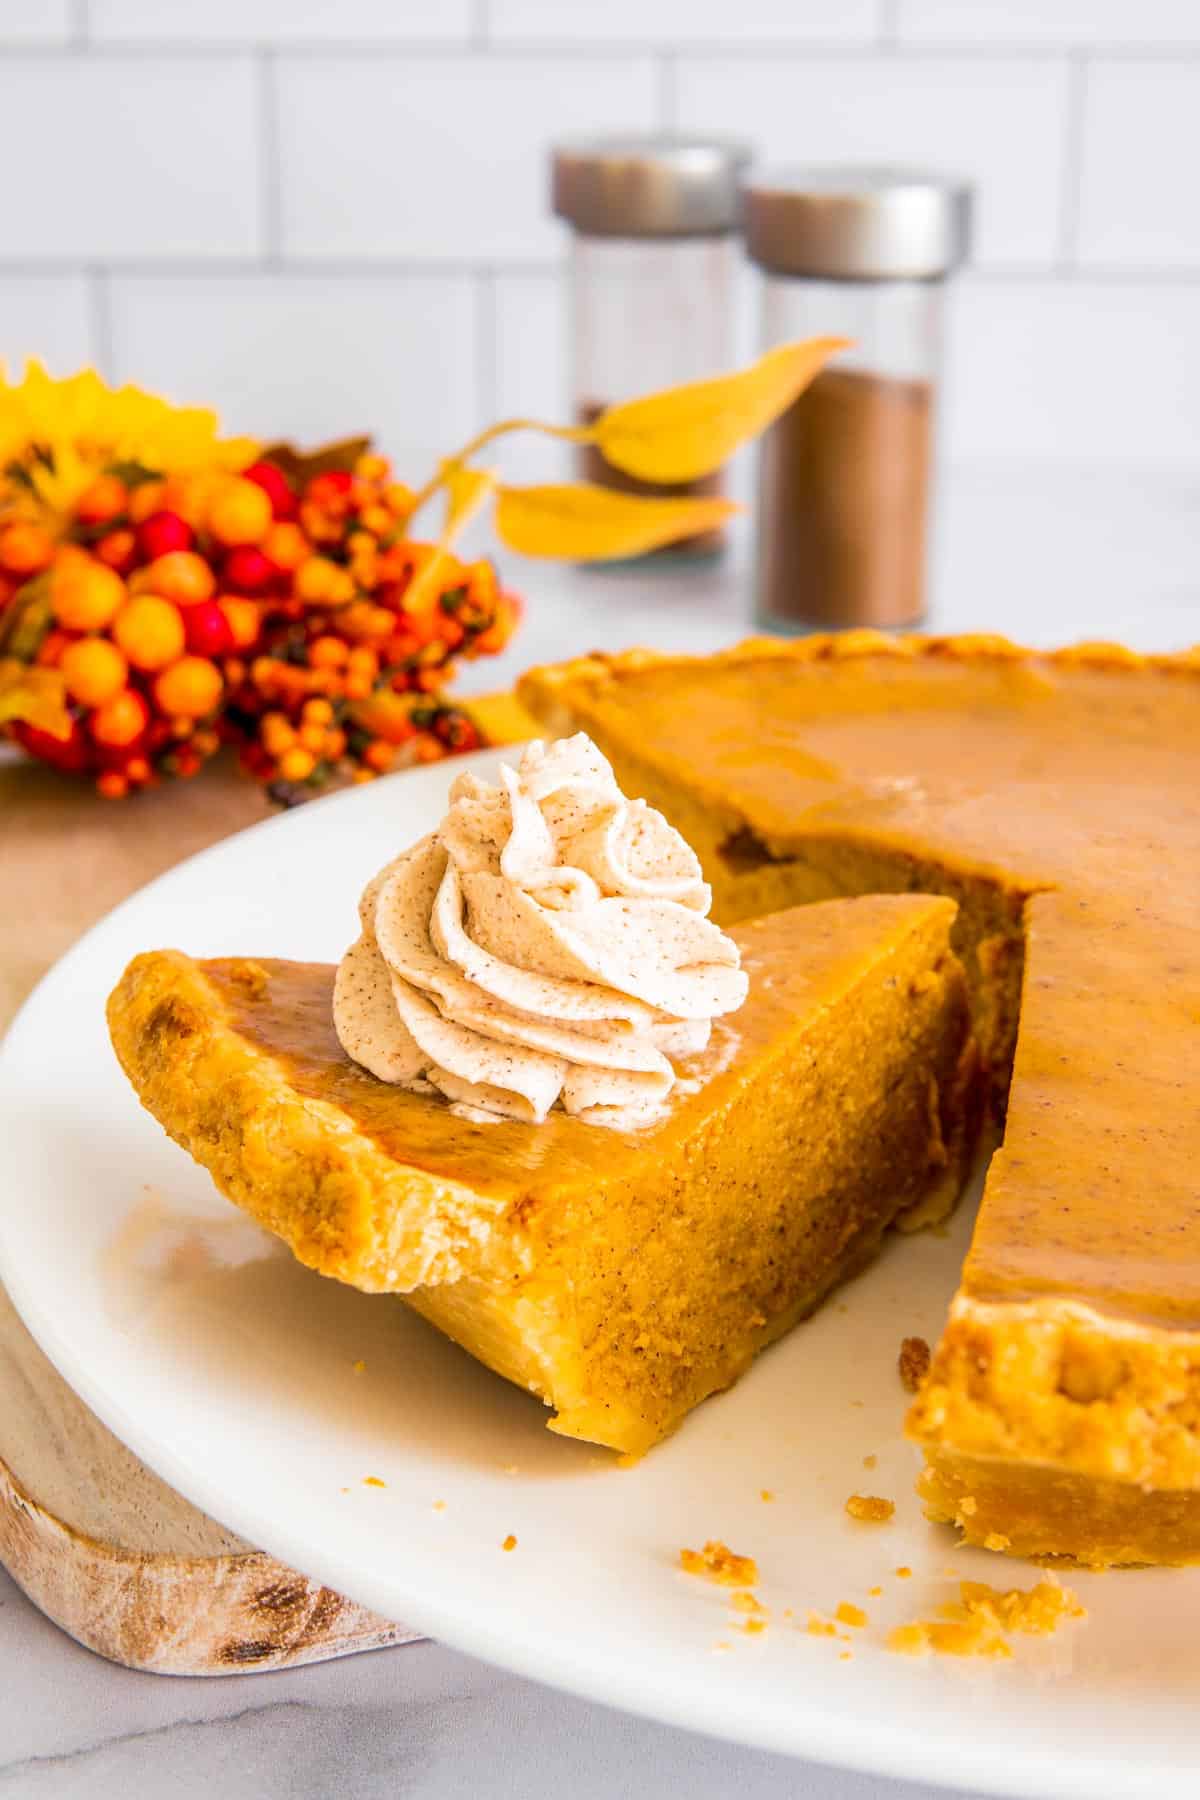 A whole pumpkin pie on a white pie plate, sliced with piped whipped cream on the slice.